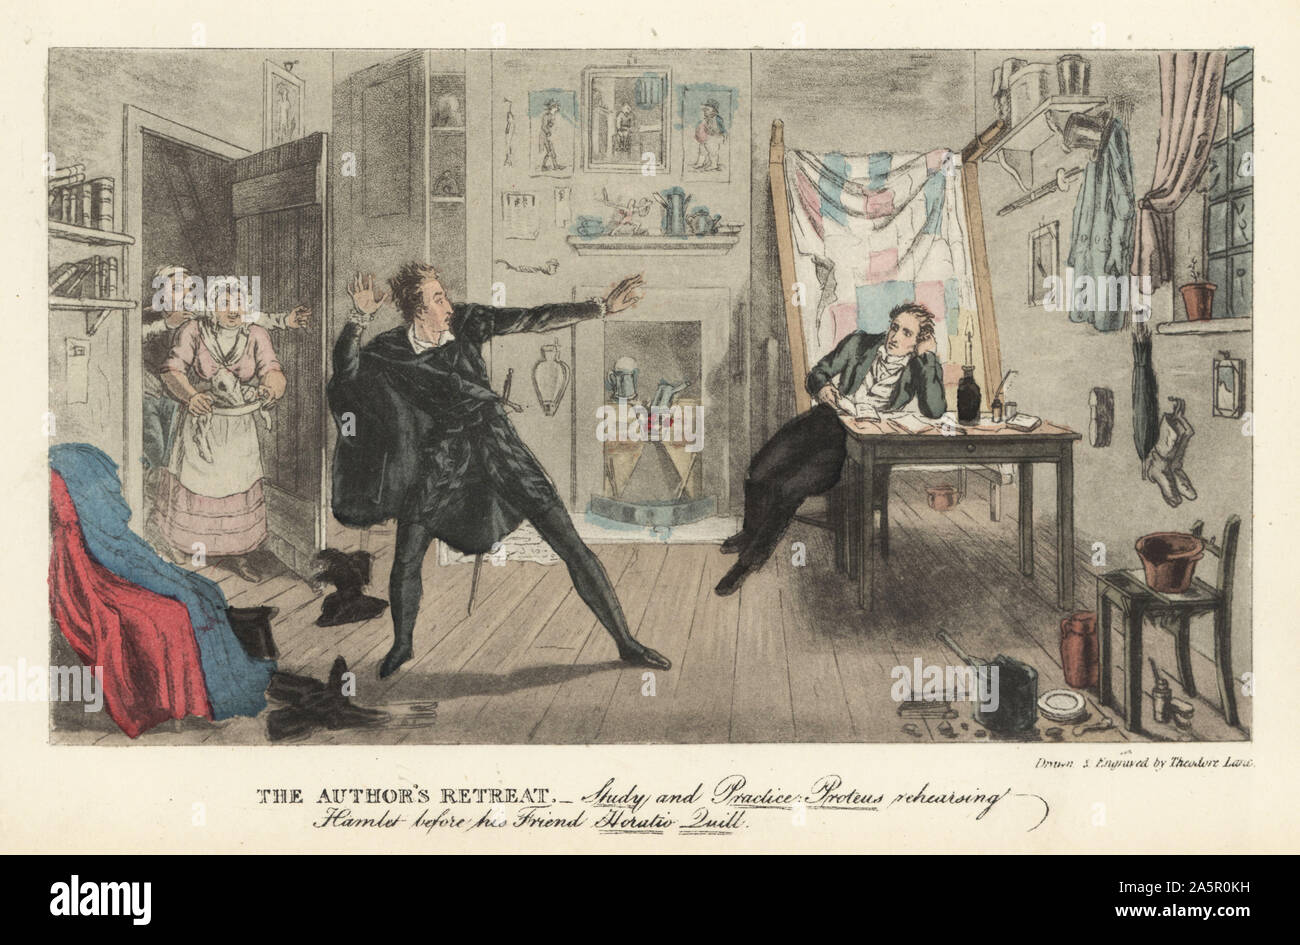 Regency actor rehearsing Hamlet in costume in his apartment. The room is decorated with boots, props and playbills, the bed stood against the wall. The Author’s Retreat. Study and Practice. Proteus rehearsing Hamlet before his friend Horatio Quill. Handcoloured engraving etched by Theodore Lane from Pierce Egan’s The Life of an Actor, Pickering and Chatto, London, 1892. Stock Photo